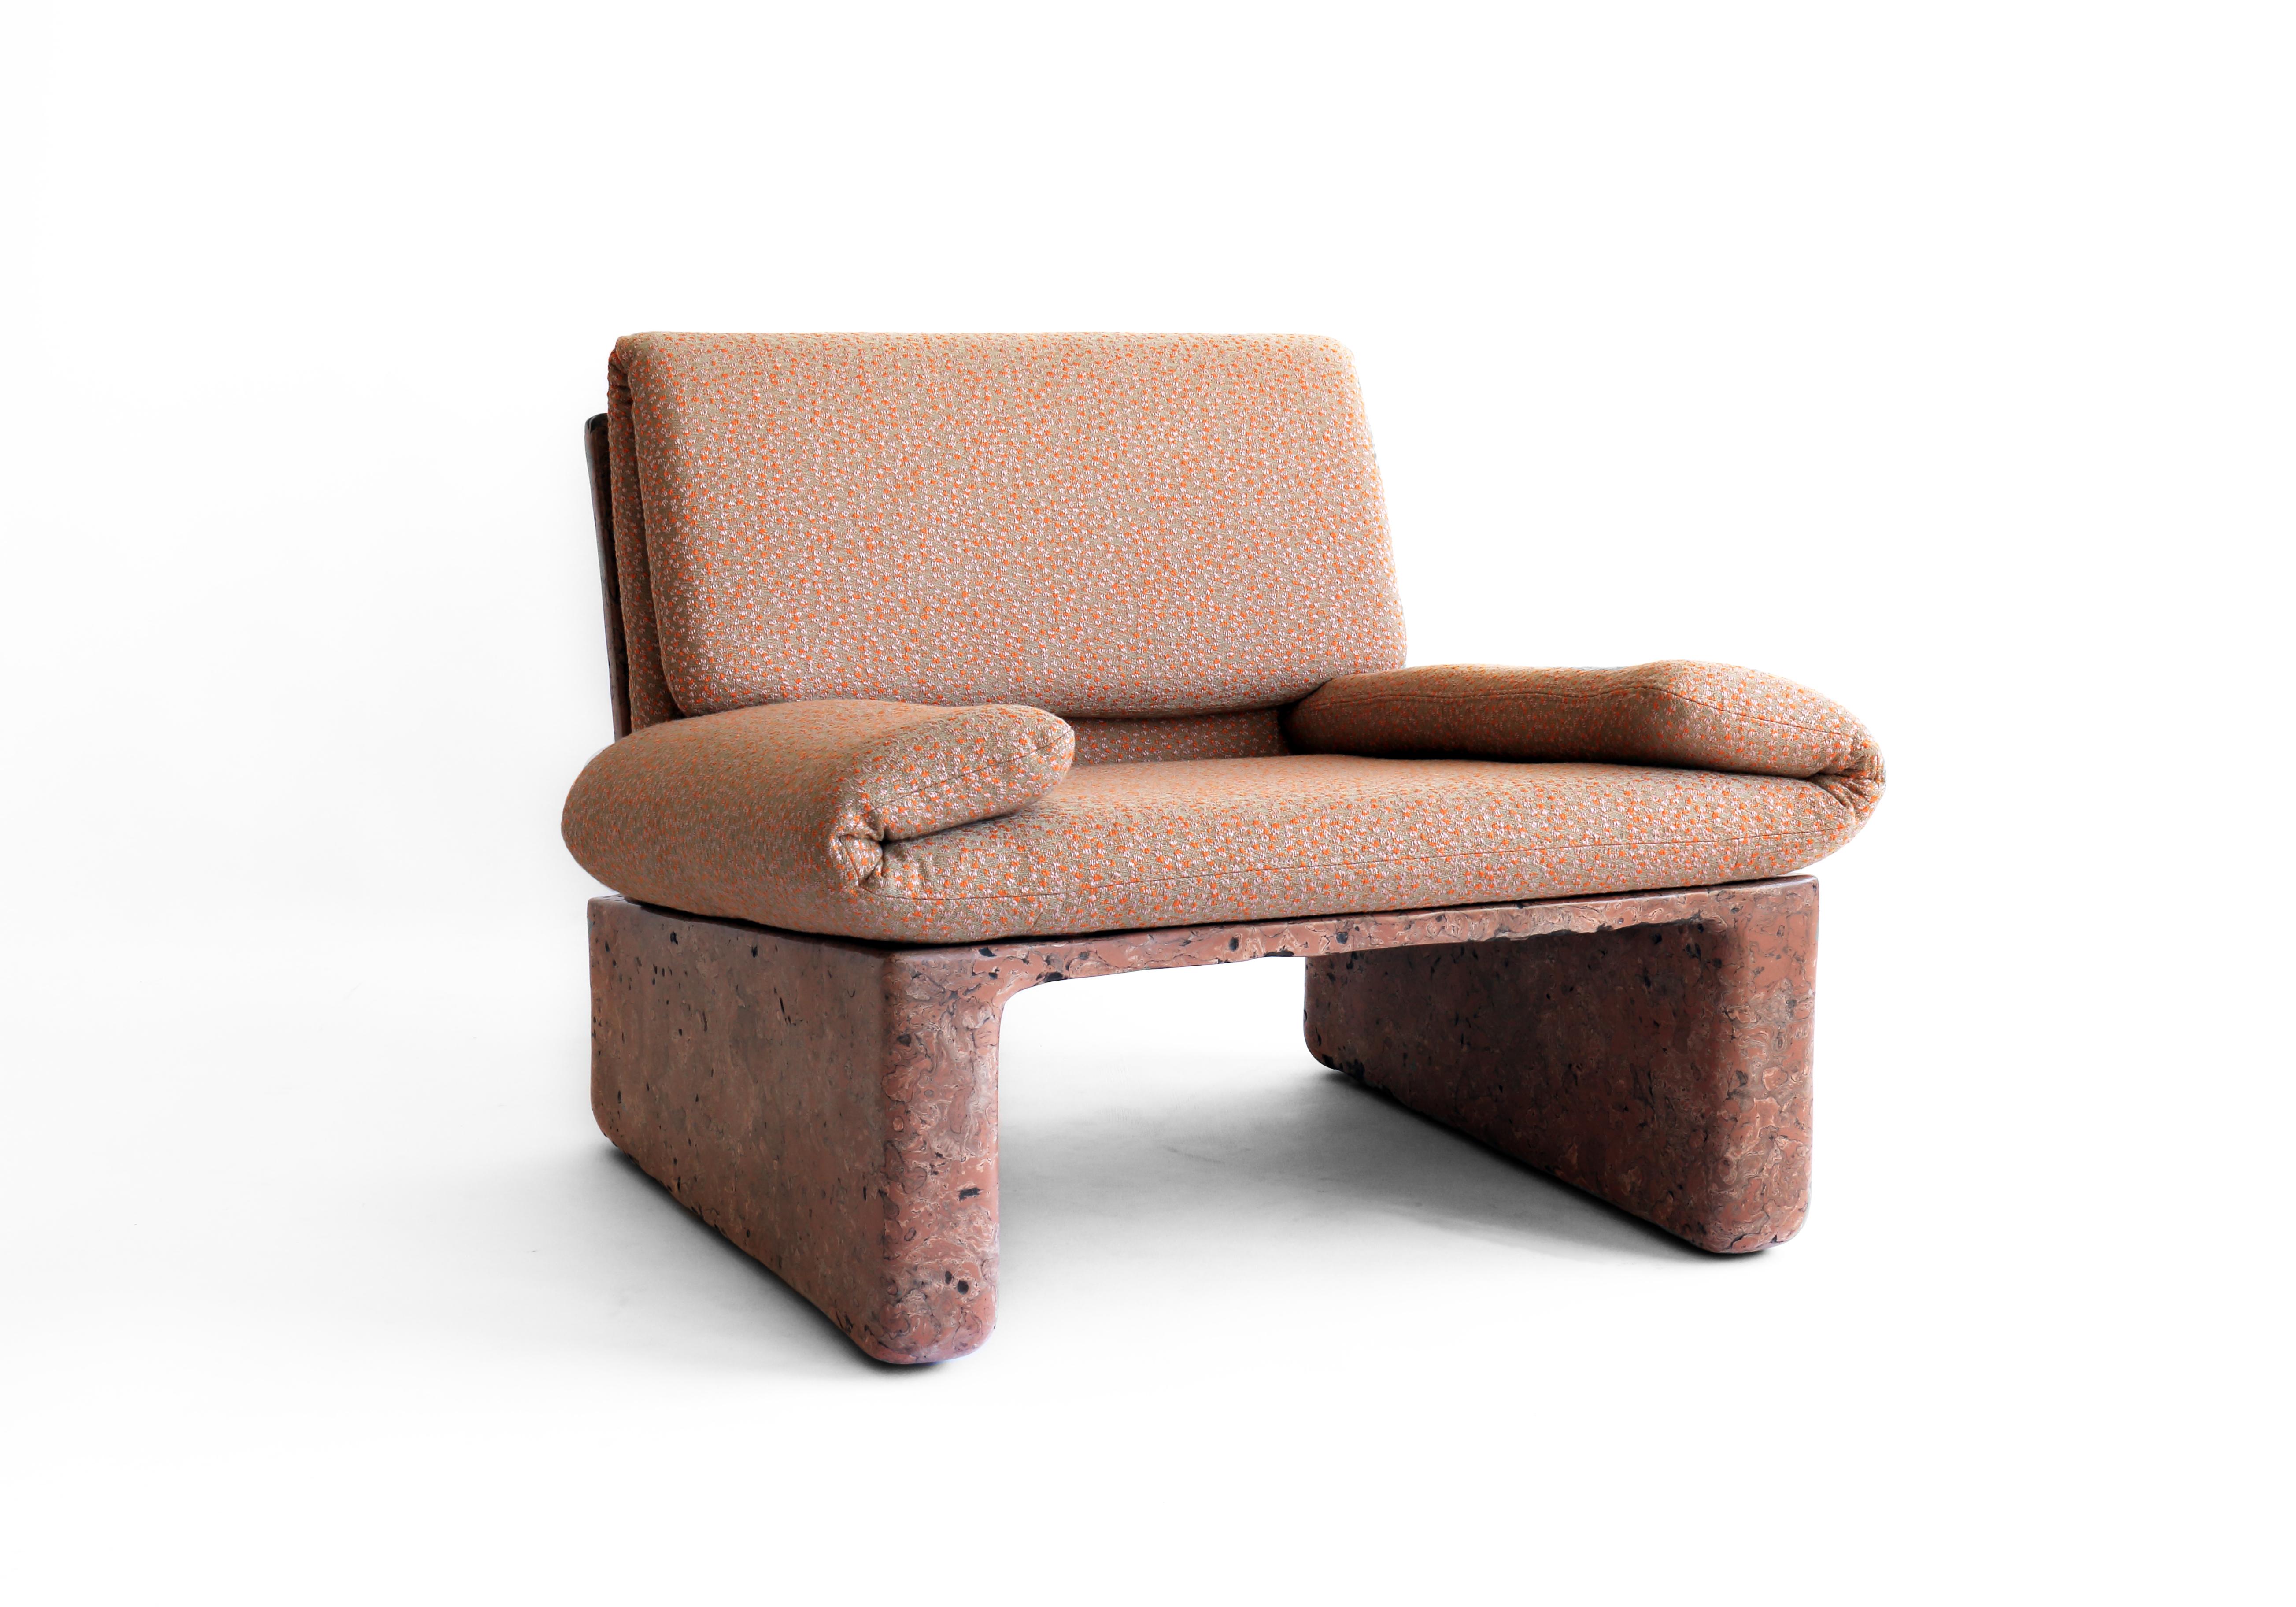 Club chair is presented by Volume Gallery

The club chairs by Ross Hansen are comfortable seating elements upholstered in Raf Simmons Kvadrat fabric.
 